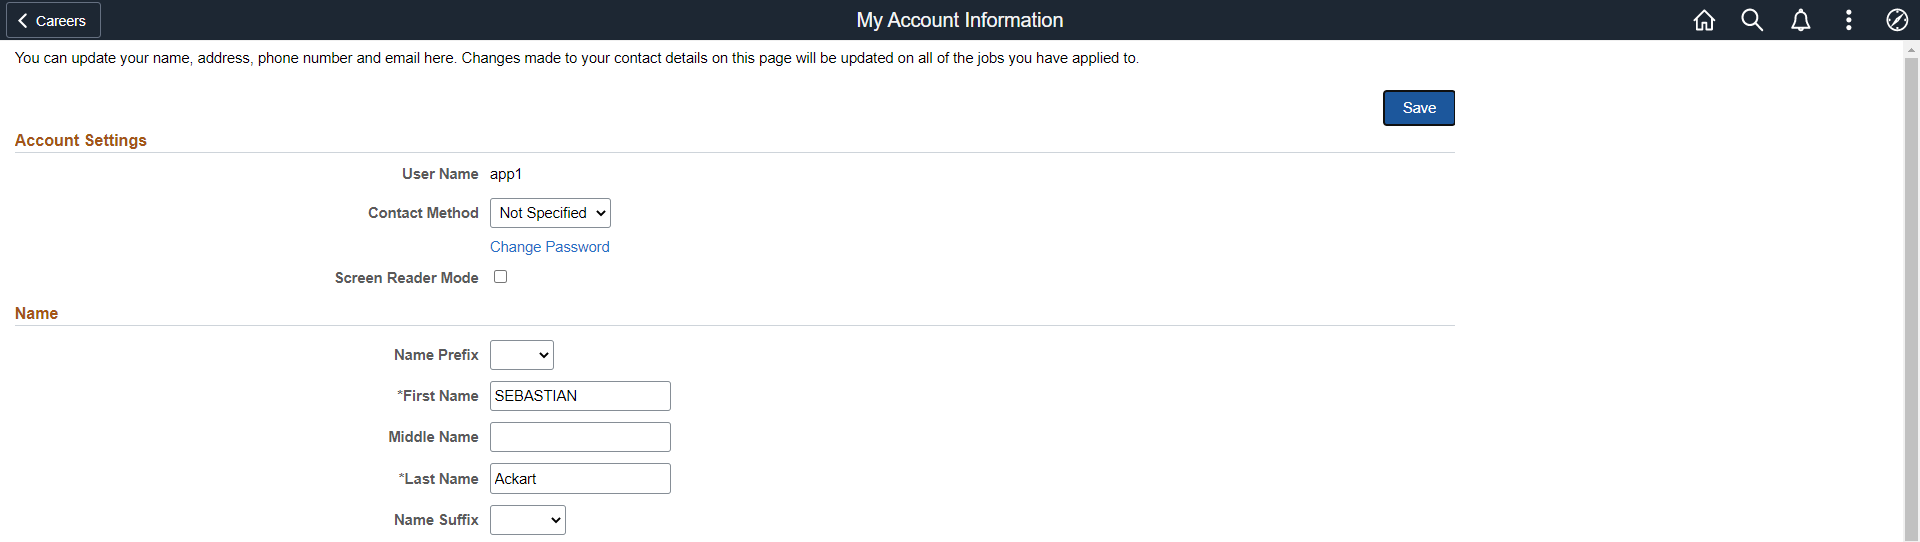 My Account Information page (fluid) (1 of 2)